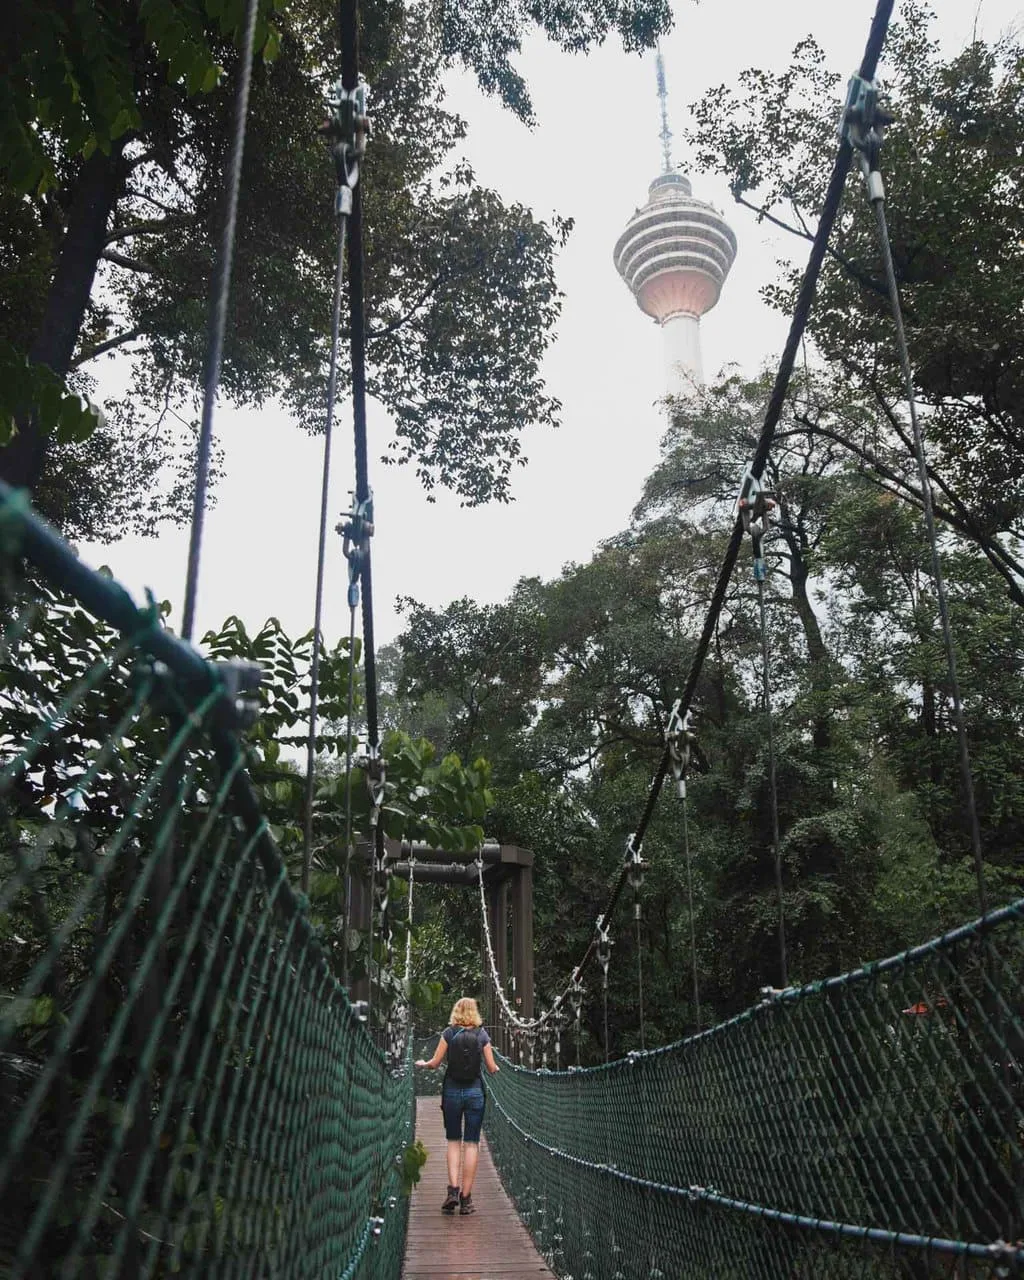 KL Eco Forest Park, Kuala Lumpur, KL Tower